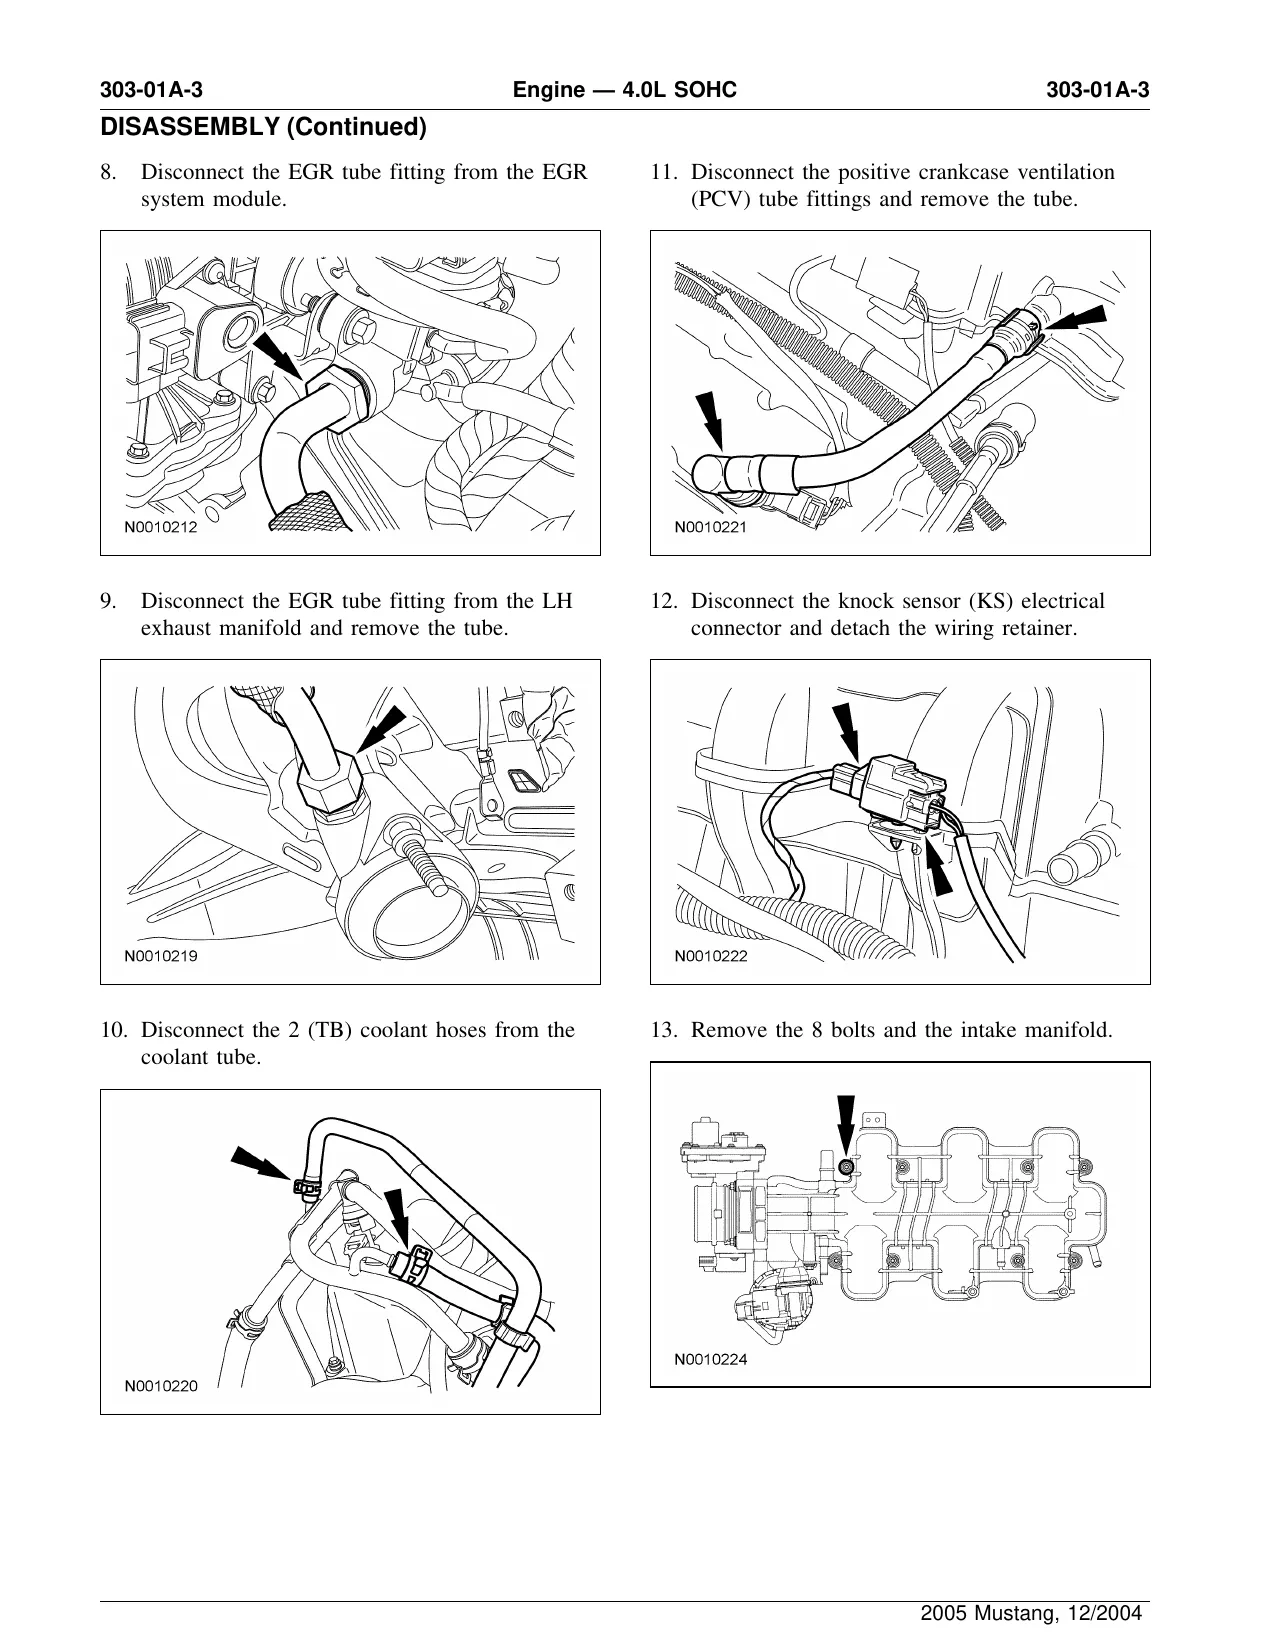 2005-2010 Ford Mustang service manual Preview image 3